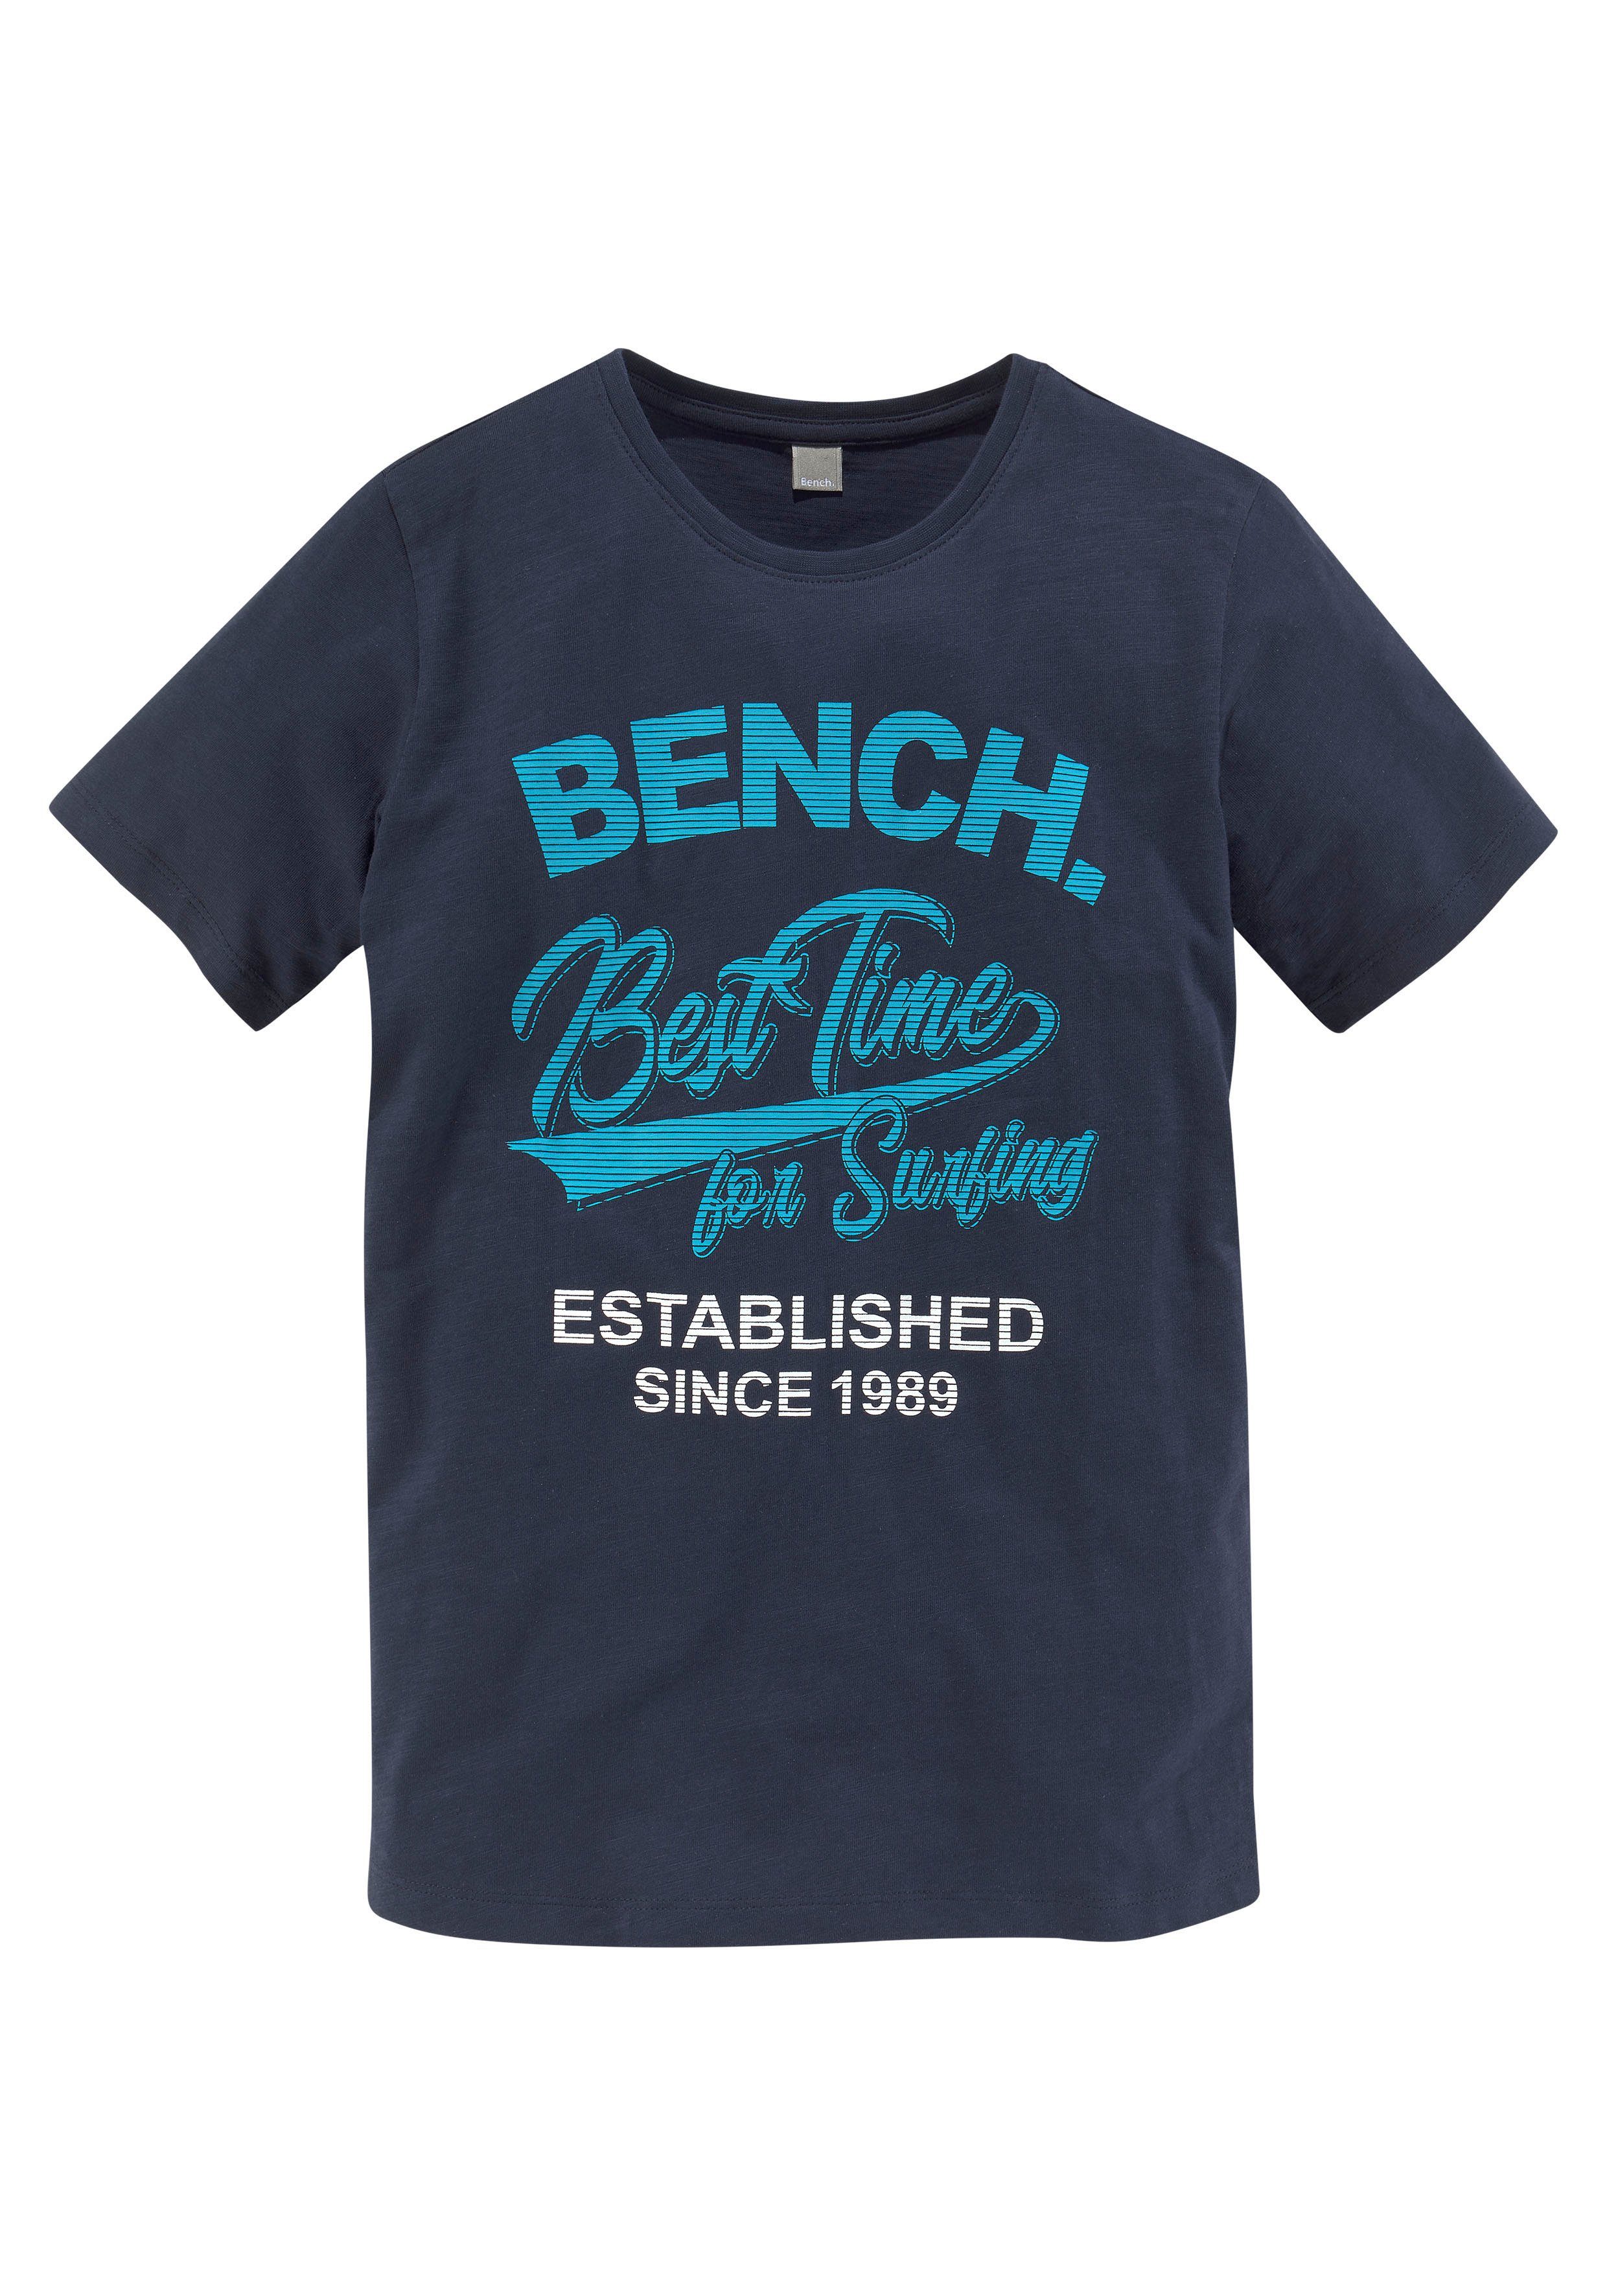 Bench. T-Shirt time Best surfing for